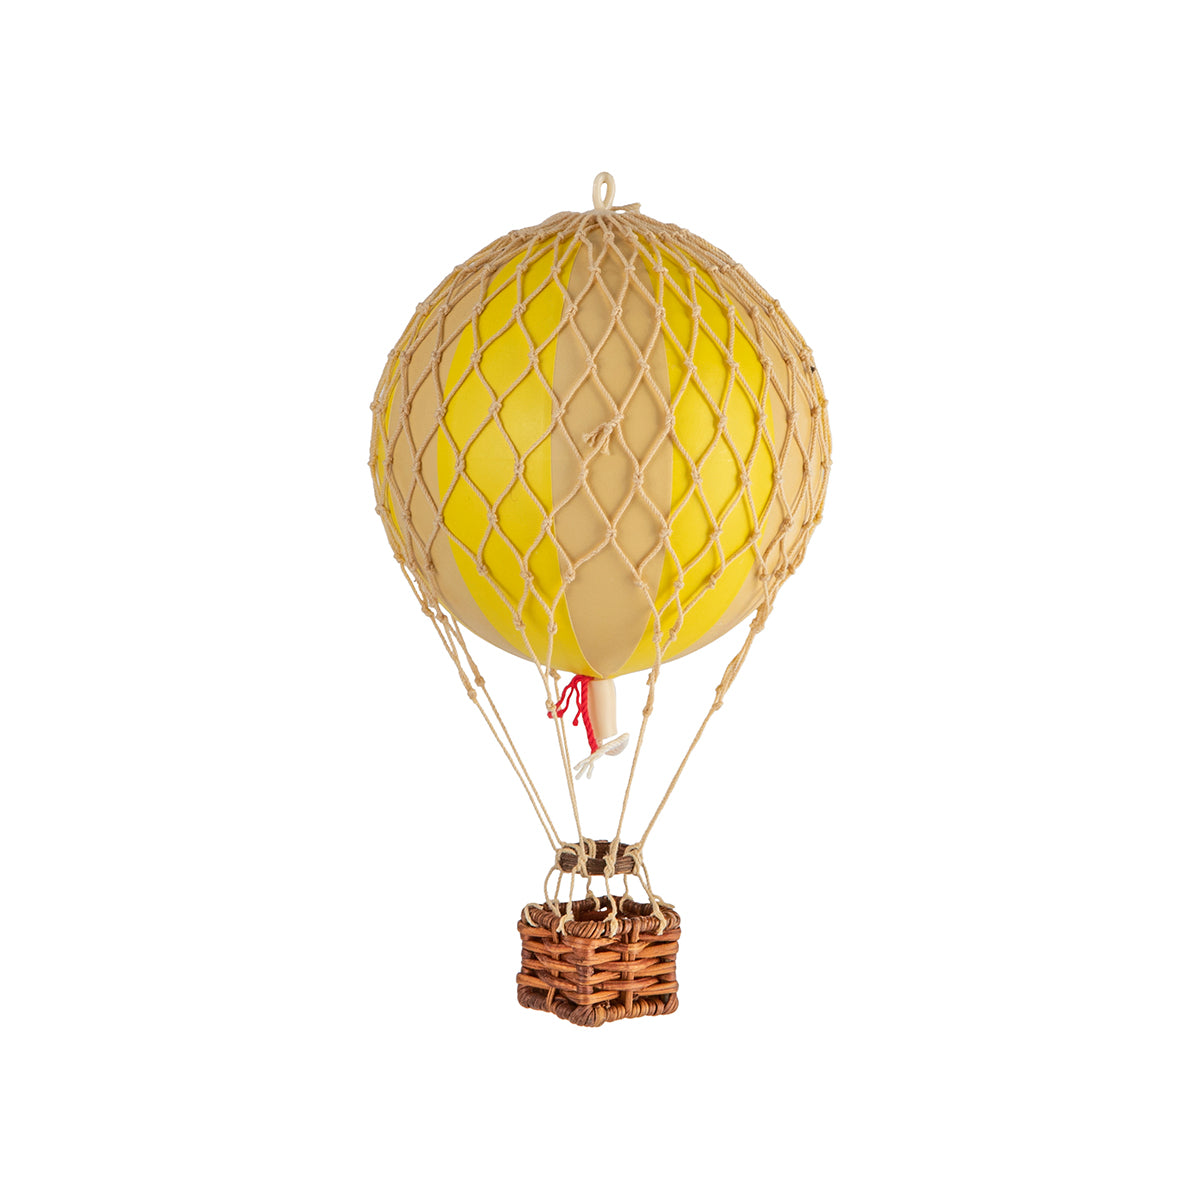 A Wonderen Extra Small Hot Air Balloon - Floating The Skies on a white background.